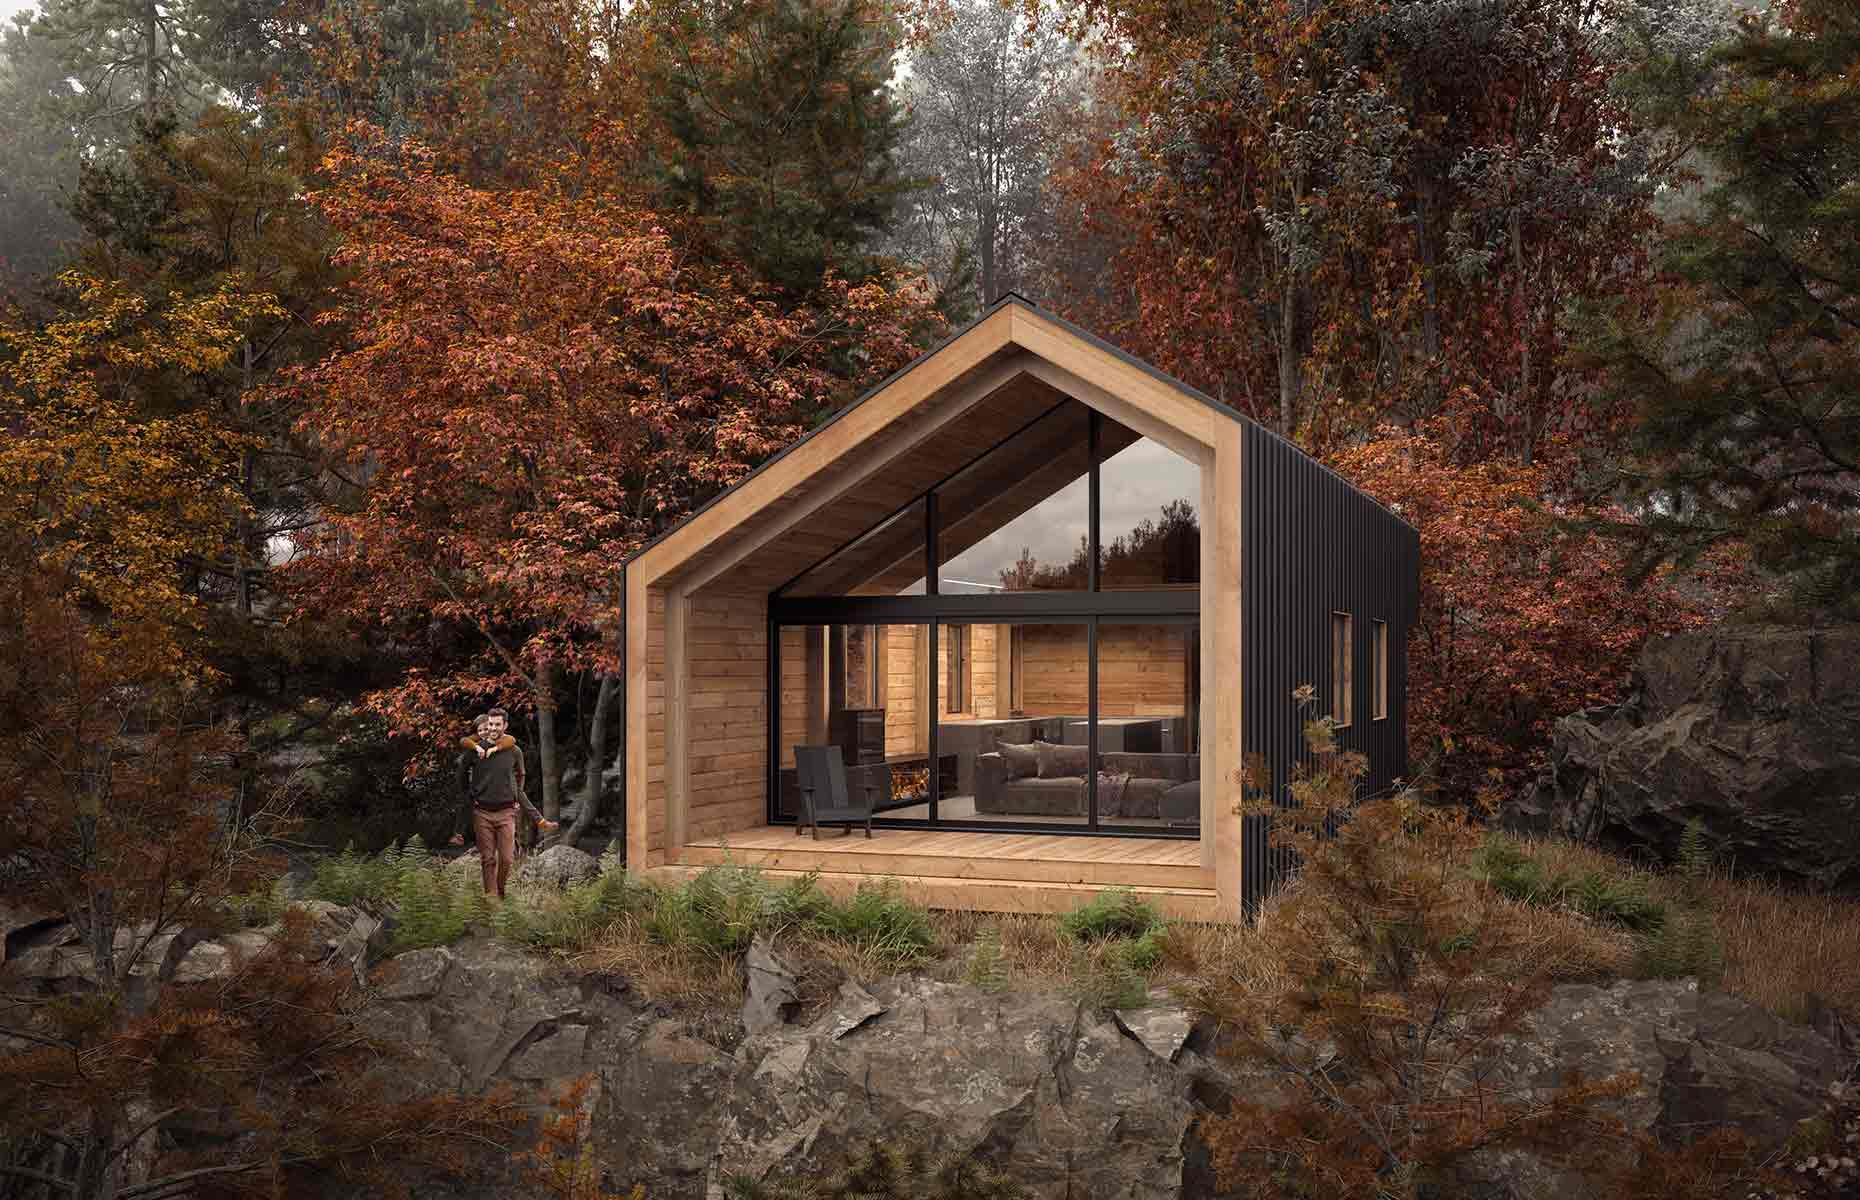 System 01 by The Backcountry Hut Company